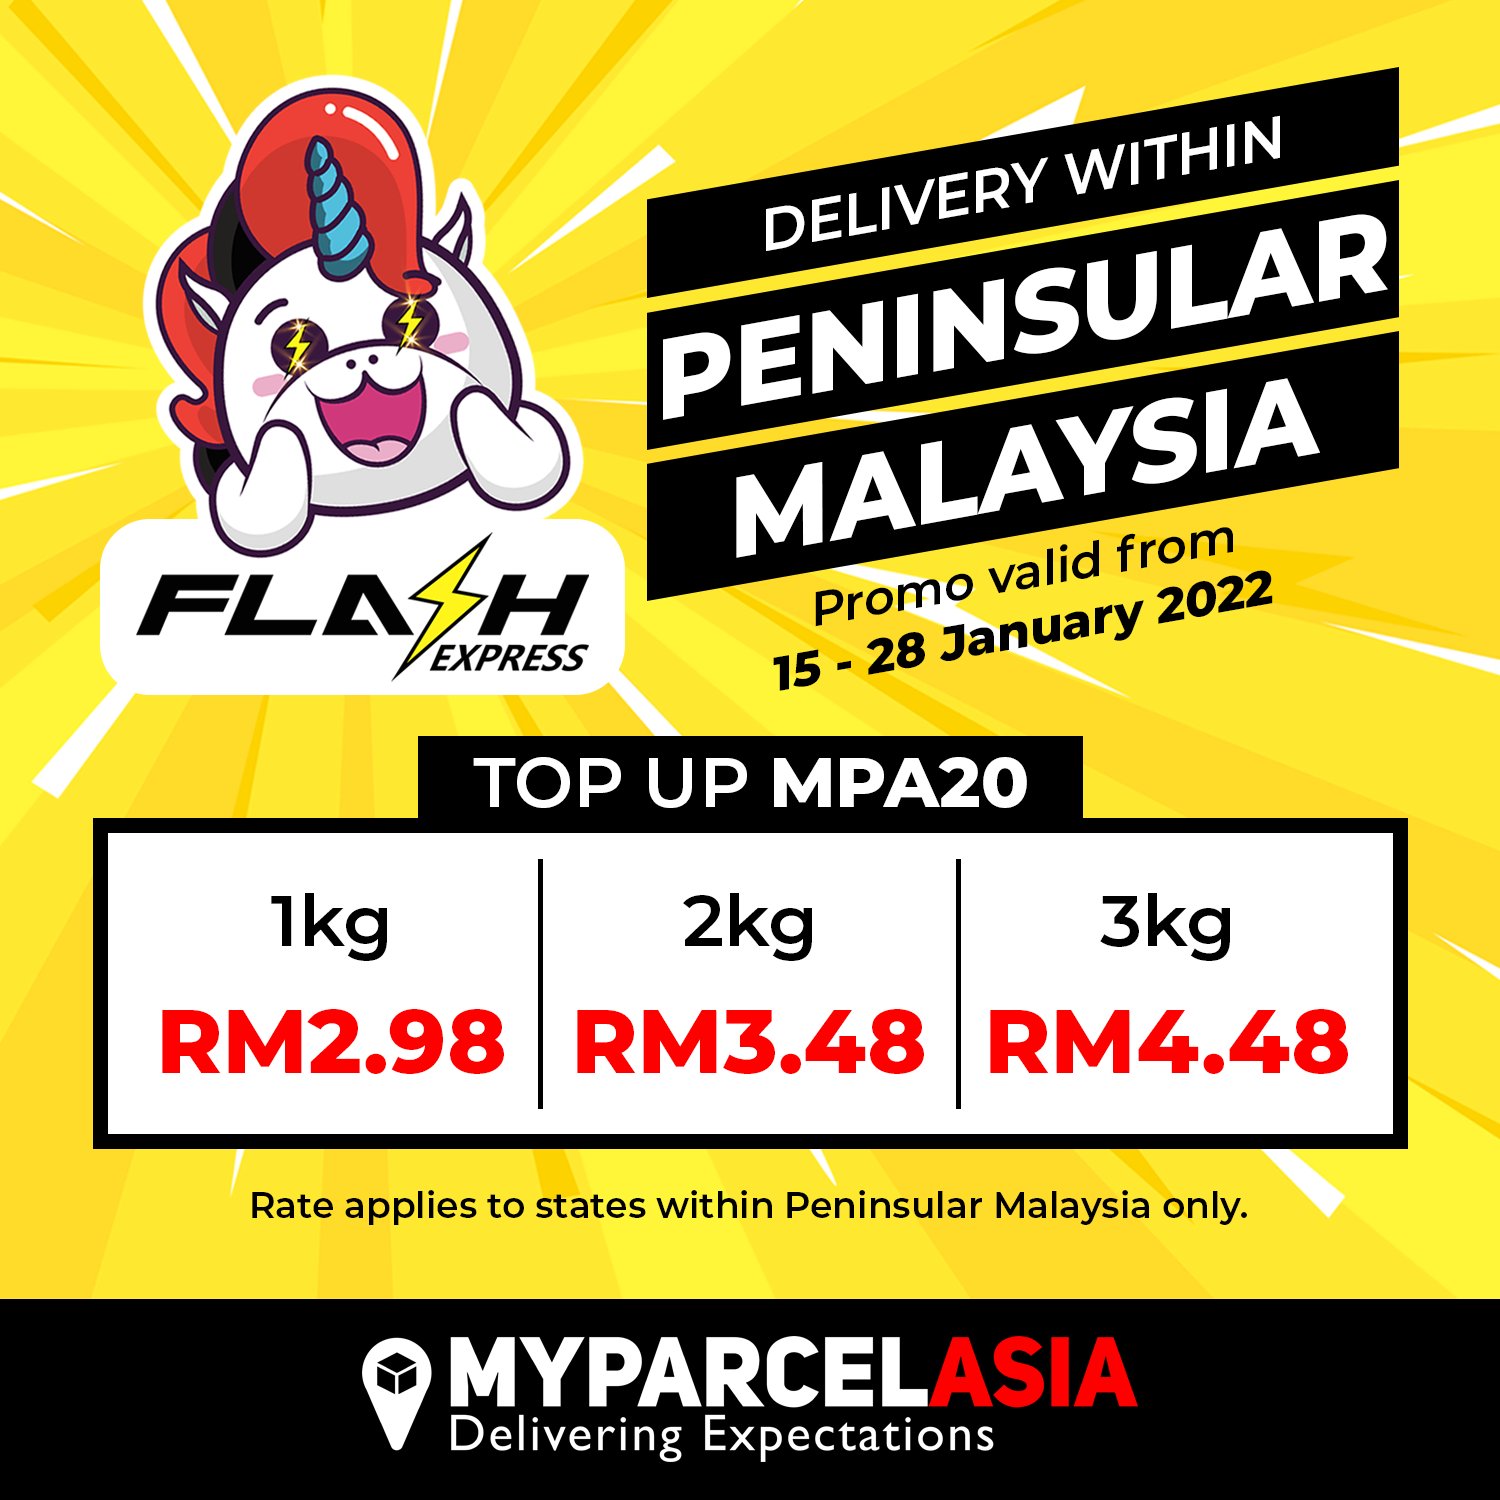 myparcelasia.com  hantar parcel dari RM5 (5kg) 🚚 on X: 𝗖𝗛𝗘𝗔𝗣𝗘𝗦𝗧  𝗣𝗥𝗜𝗖𝗘…𝗘𝗩𝗘𝗥! 𝗙𝗹𝗮𝘀𝗵 𝗘𝘅𝗽𝗿𝗲𝘀𝘀 𝗠𝗮𝗹𝗮𝘆𝘀𝗶𝗮 is now  available for you on MyParcel Asia. Enjoy the best price from 𝗮𝘀 𝗹𝗼𝘄  𝗮𝘀 𝗥𝗠𝟮.𝟰𝟴